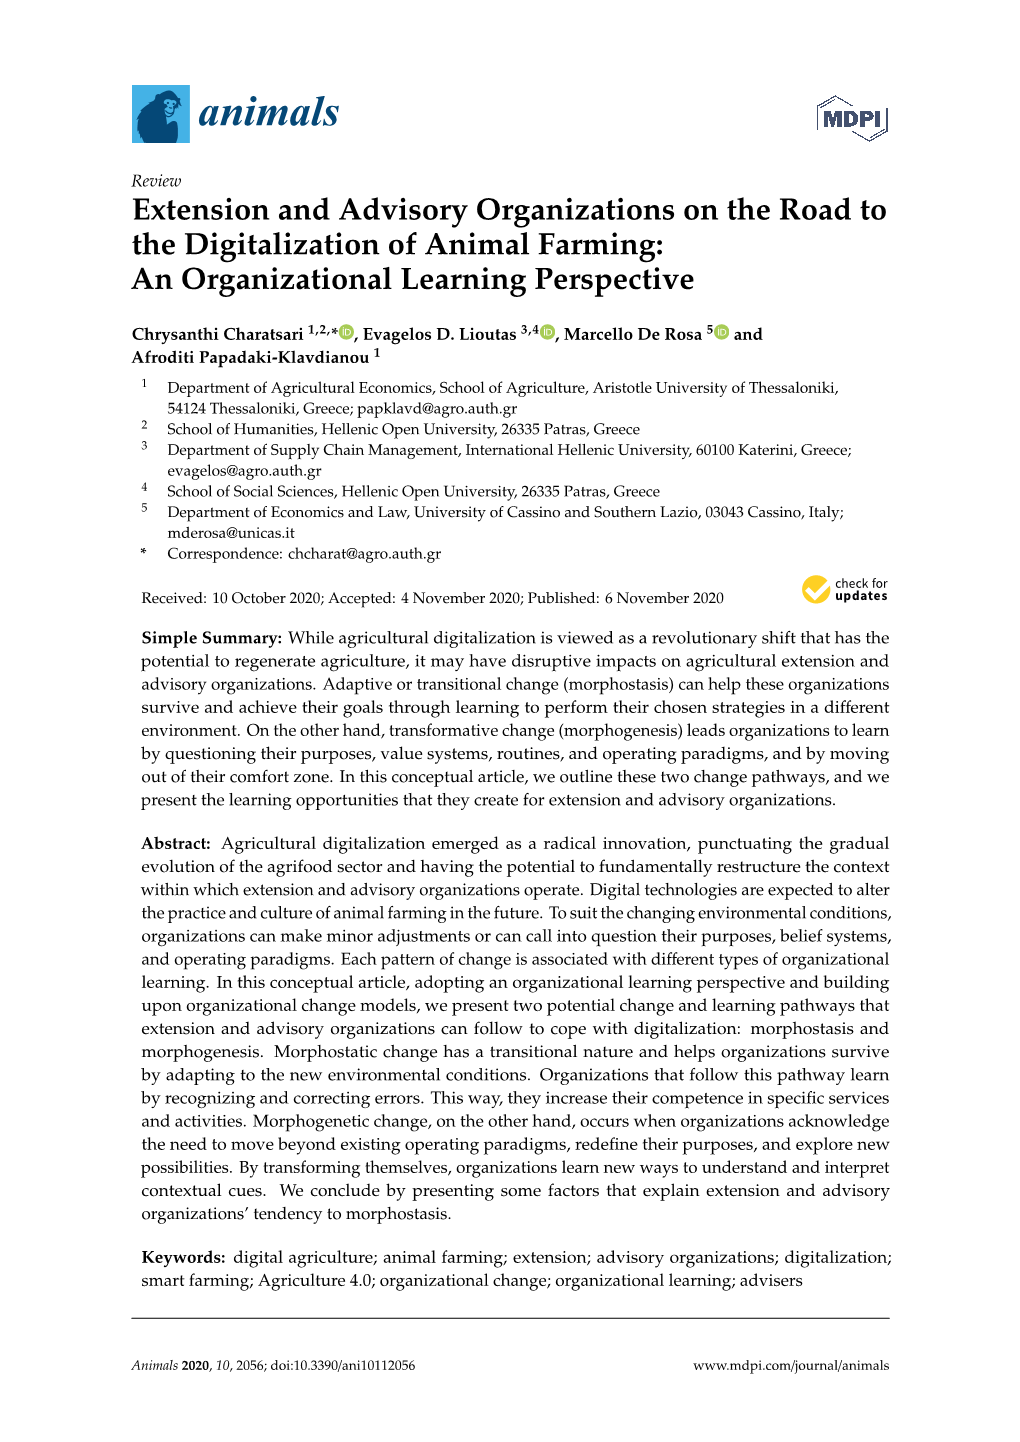 Extension and Advisory Organizations on the Road to the Digitalization of Animal Farming: an Organizational Learning Perspective